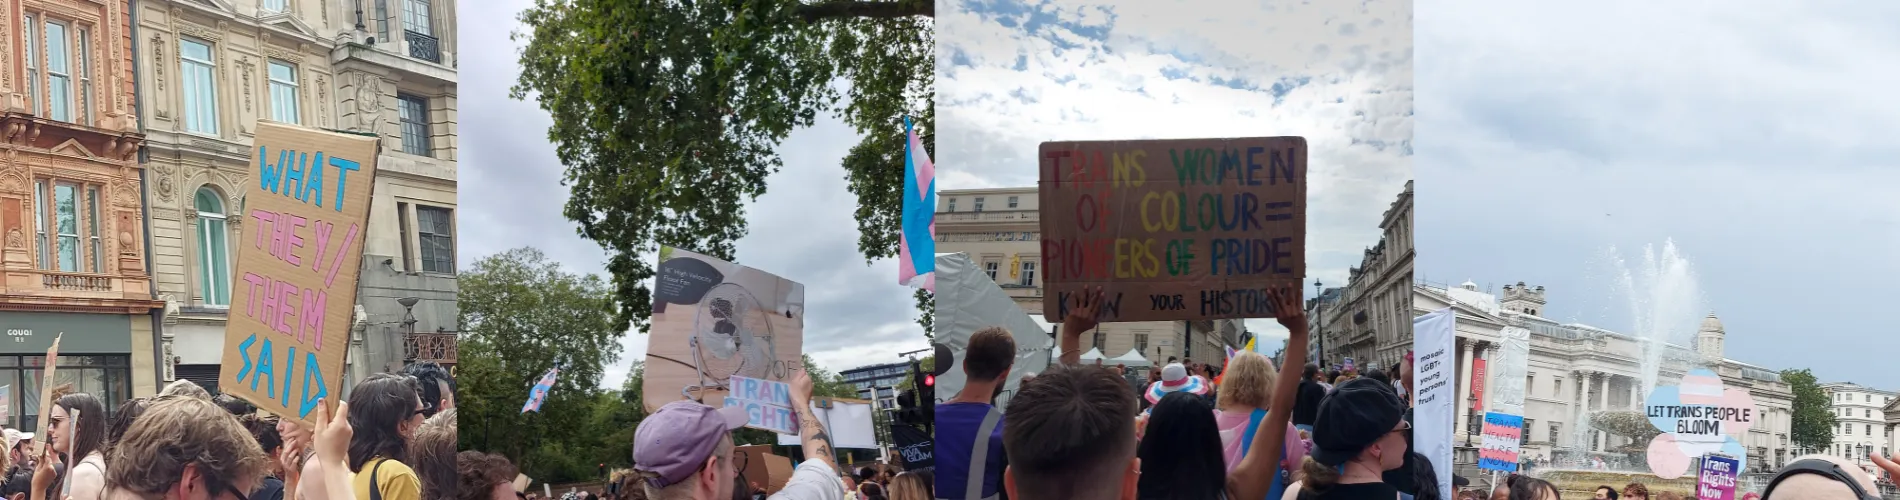 A collage of images from Trans Pride in London.